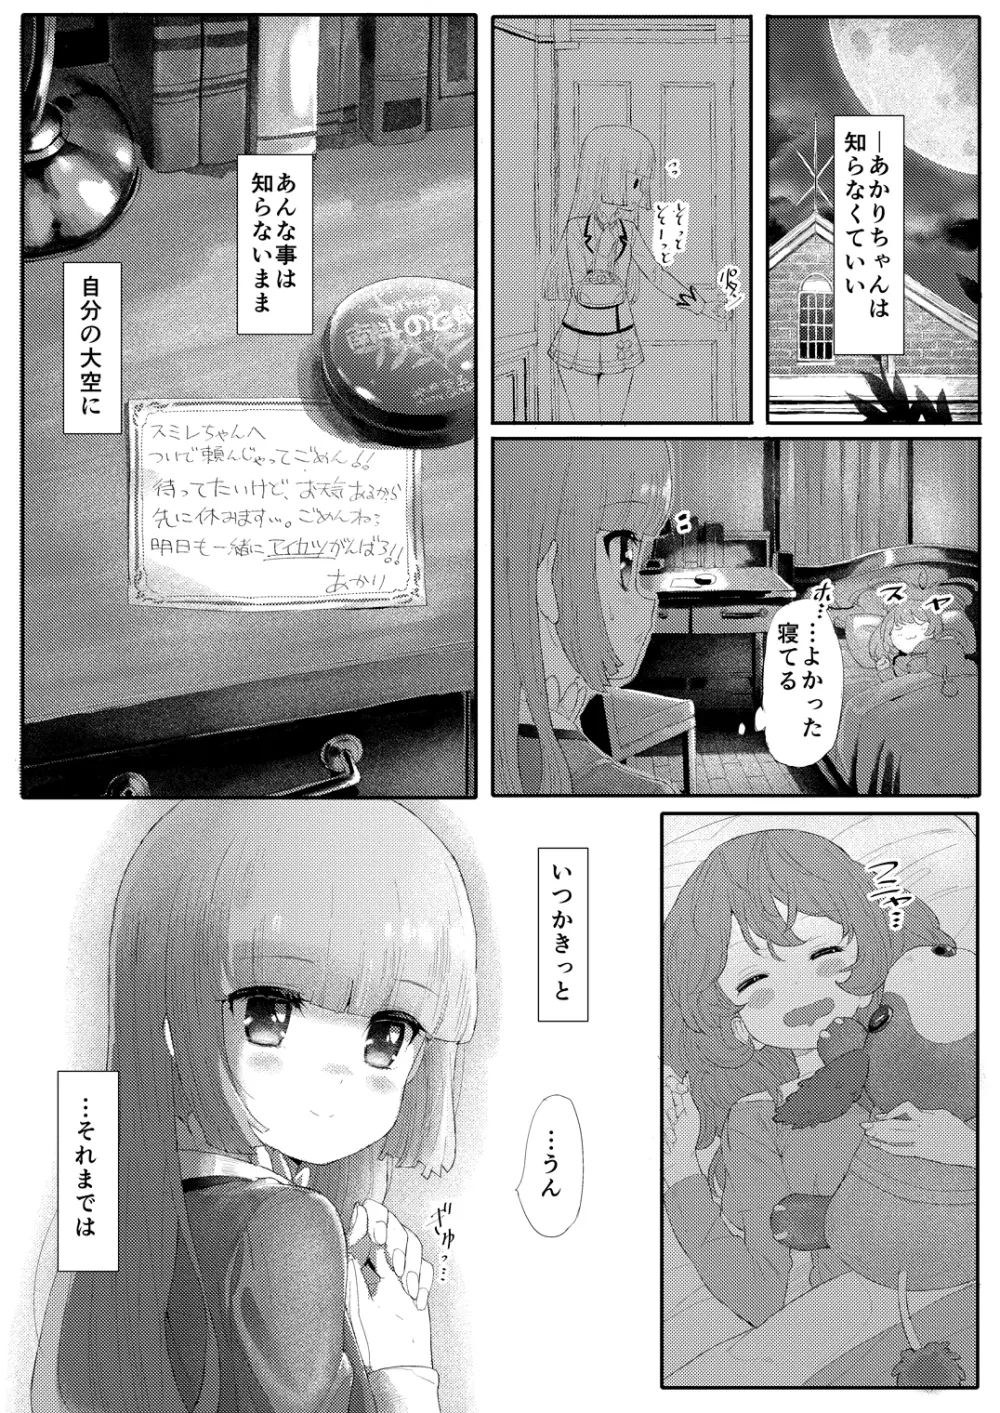 MG+OO SP - page17